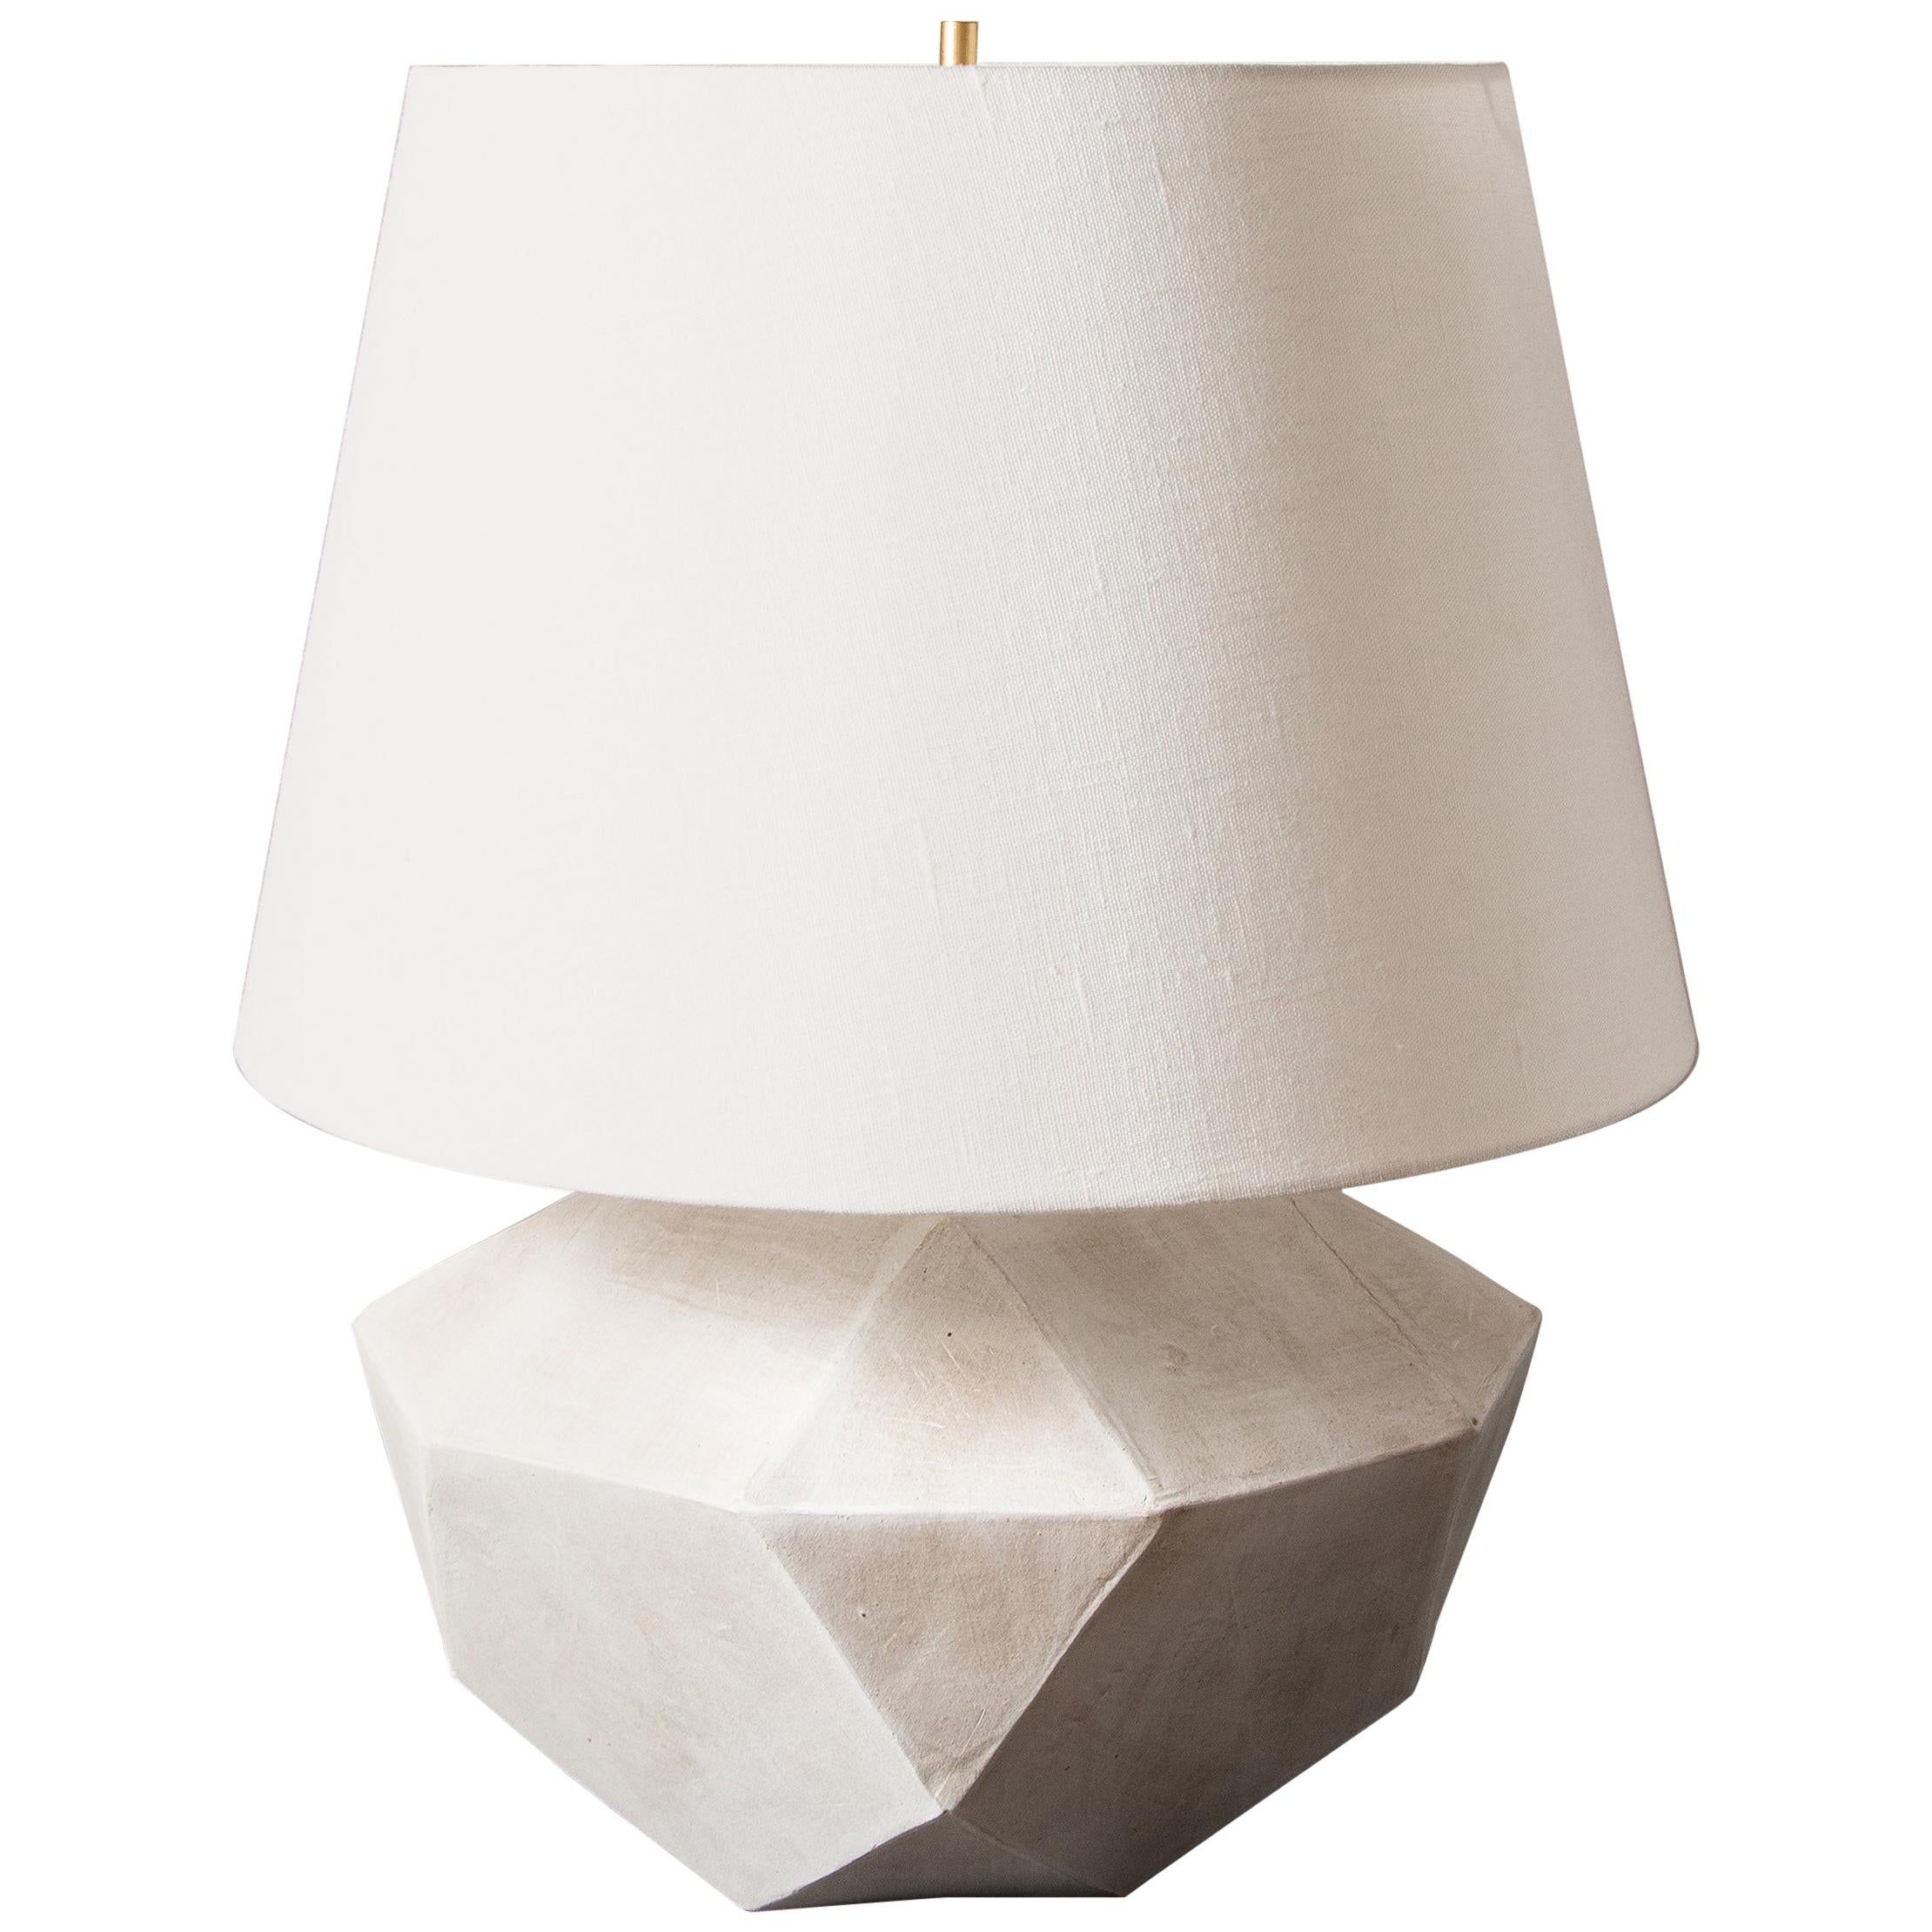 Geode Lamp 2 - Geometric White Ceramic and Brass Table Lamp For Sale